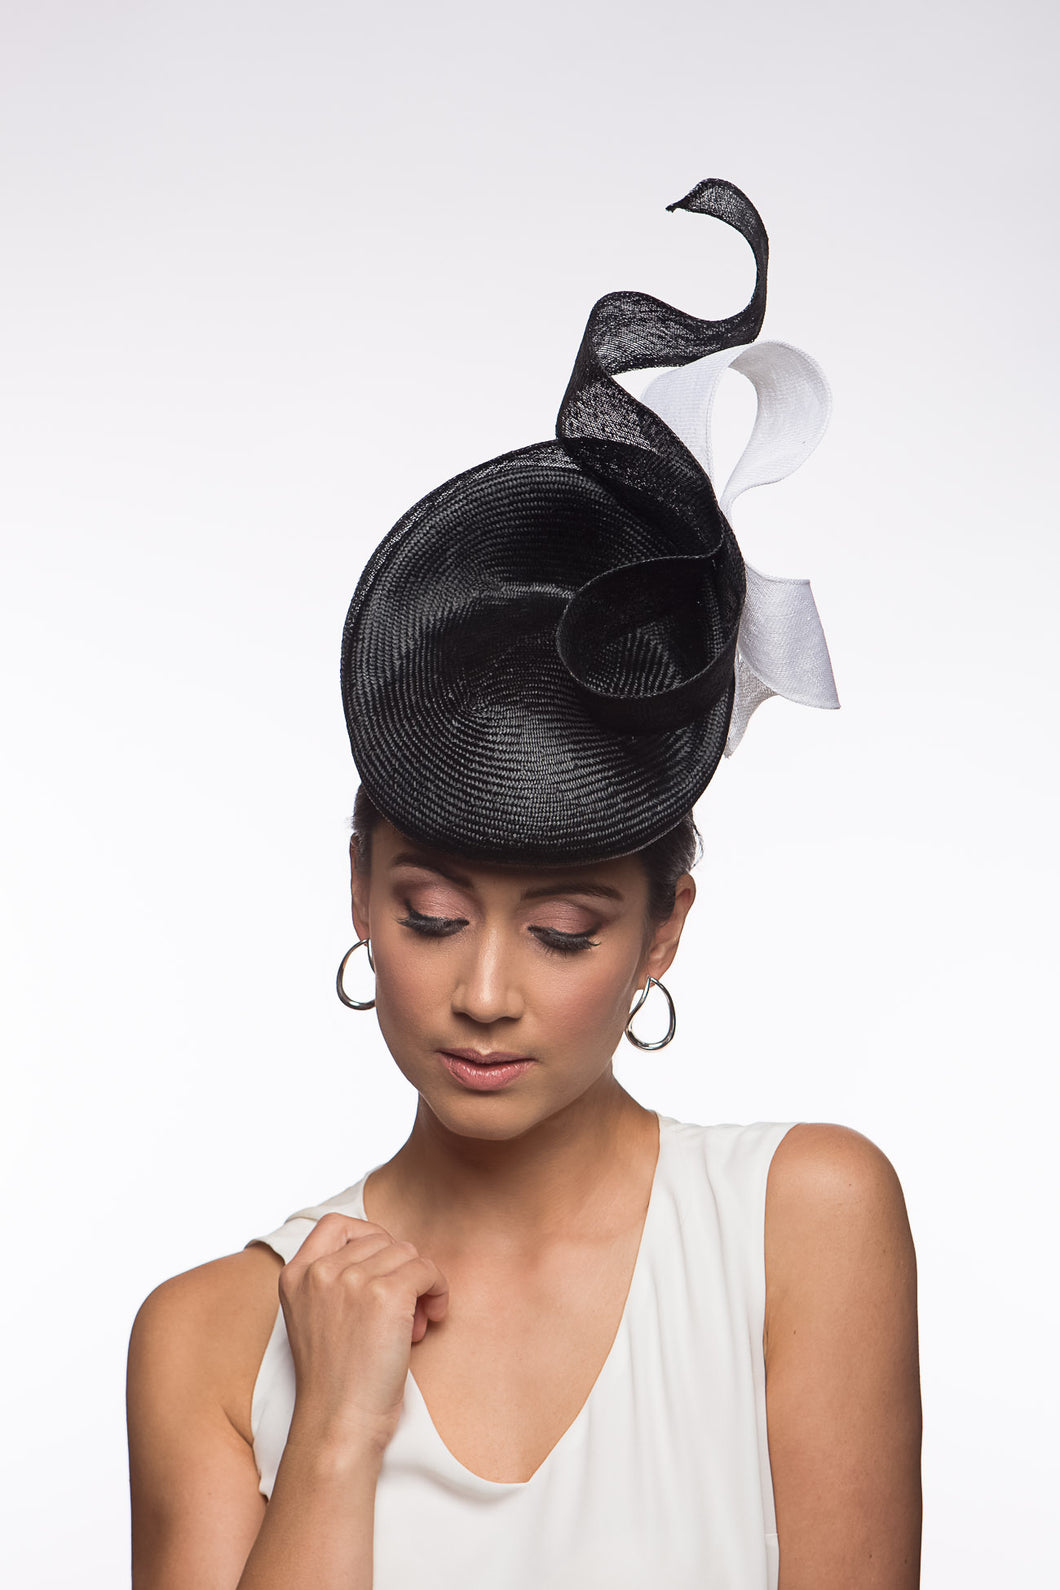 The Black and White Swirl Beret Platter Hat is a, raised button beret in black straw and trimmed with a white floating bow